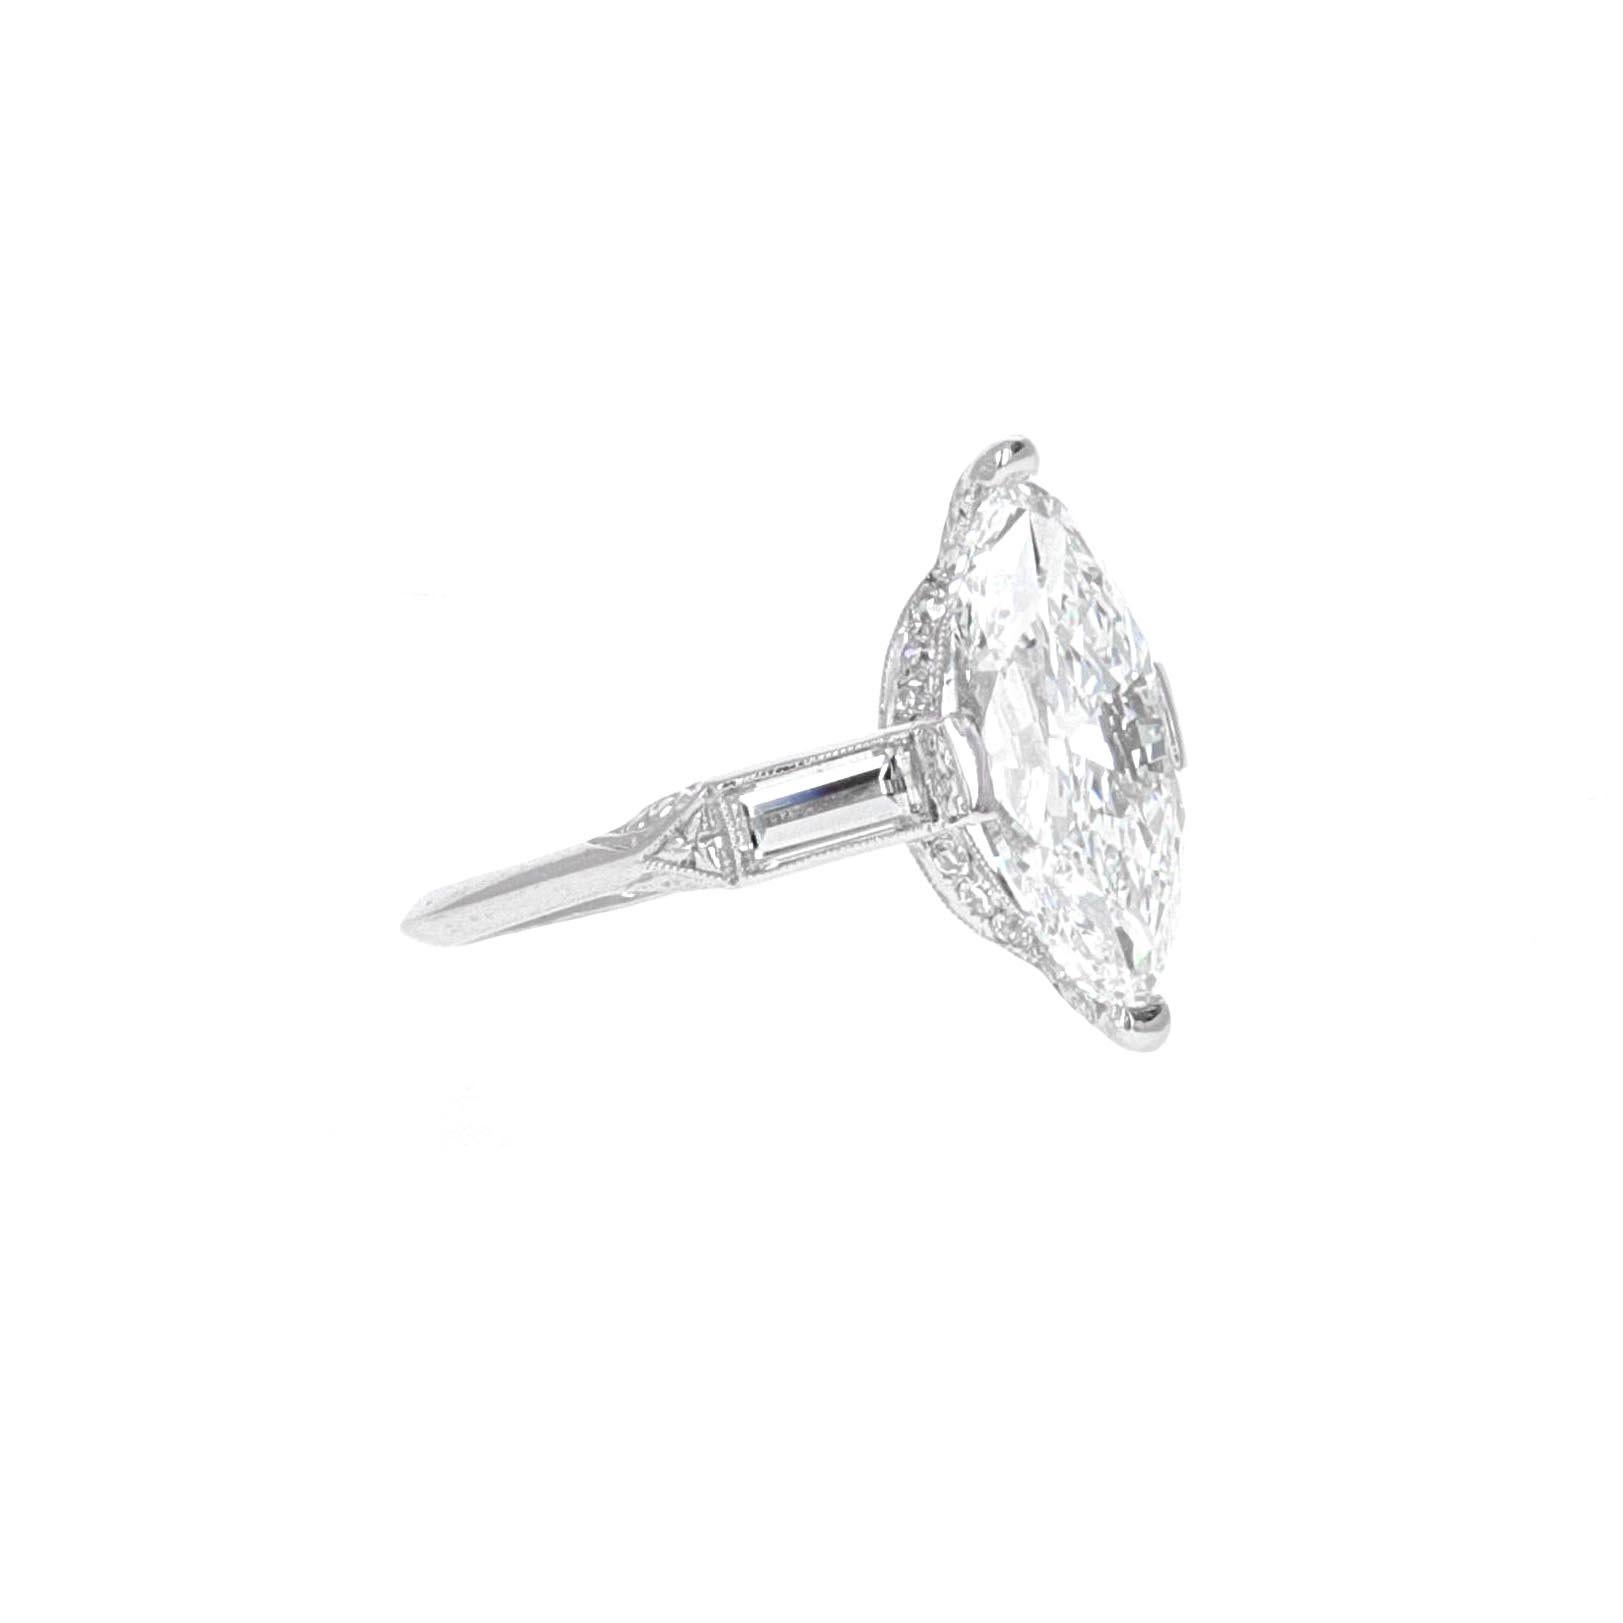 Art deco, GIA certified, 4.02 carat antique marquise diamond bridal engagement ring mounted in platinum. This stunning art deco style marquise ring is a classic example of the style trends in the 1920's decade. The GIA graded this stone as a 4.02